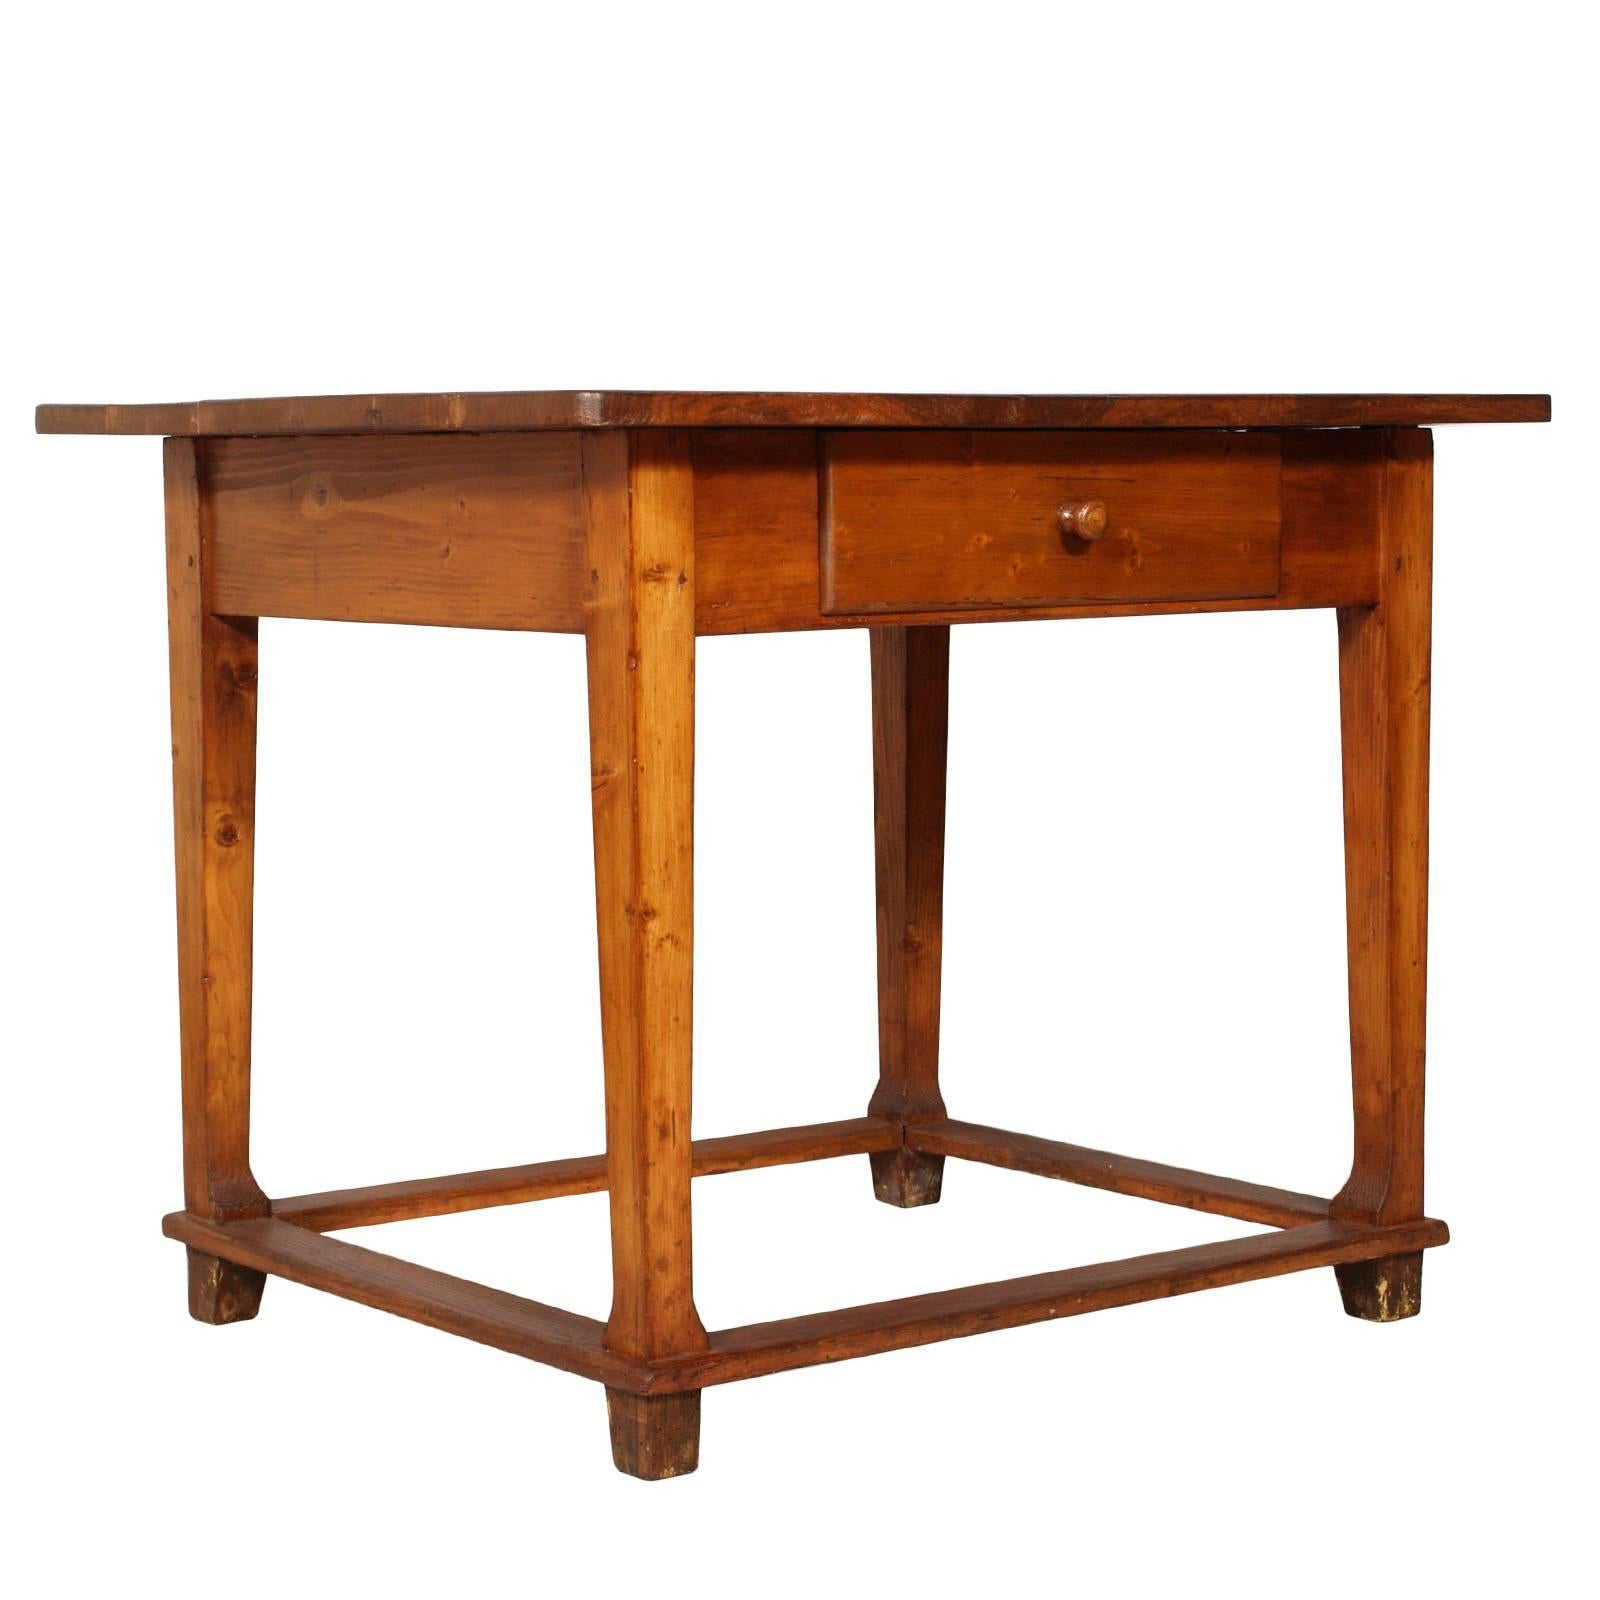 Late 19th Century Tyrol Desk/Working Table, Solid Wood Restored and Wax Finished